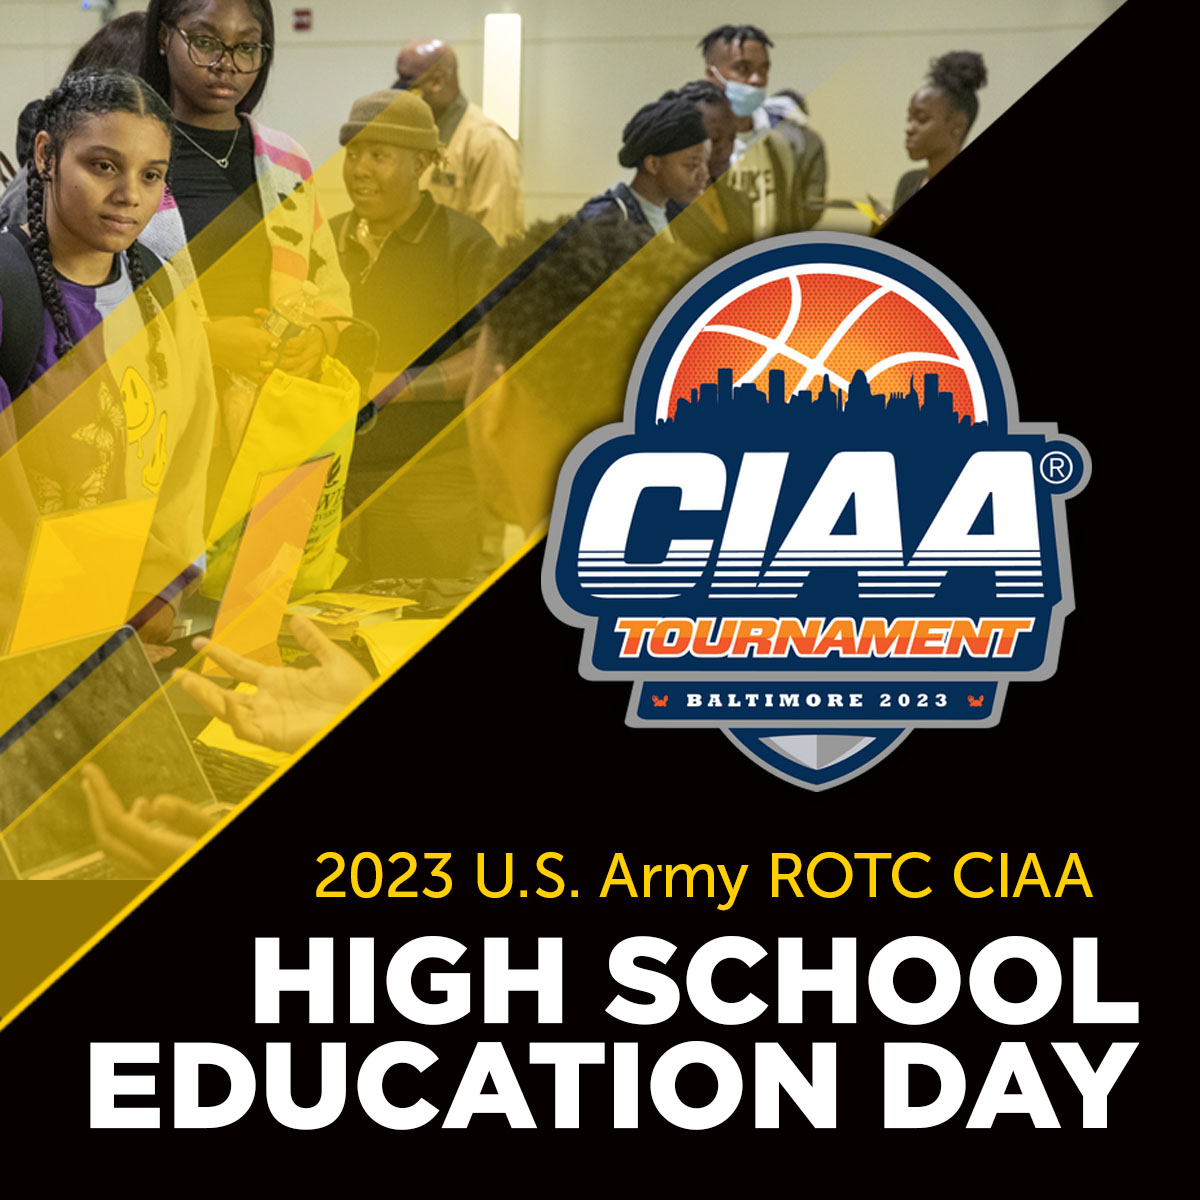 CIAA Events Bowie State